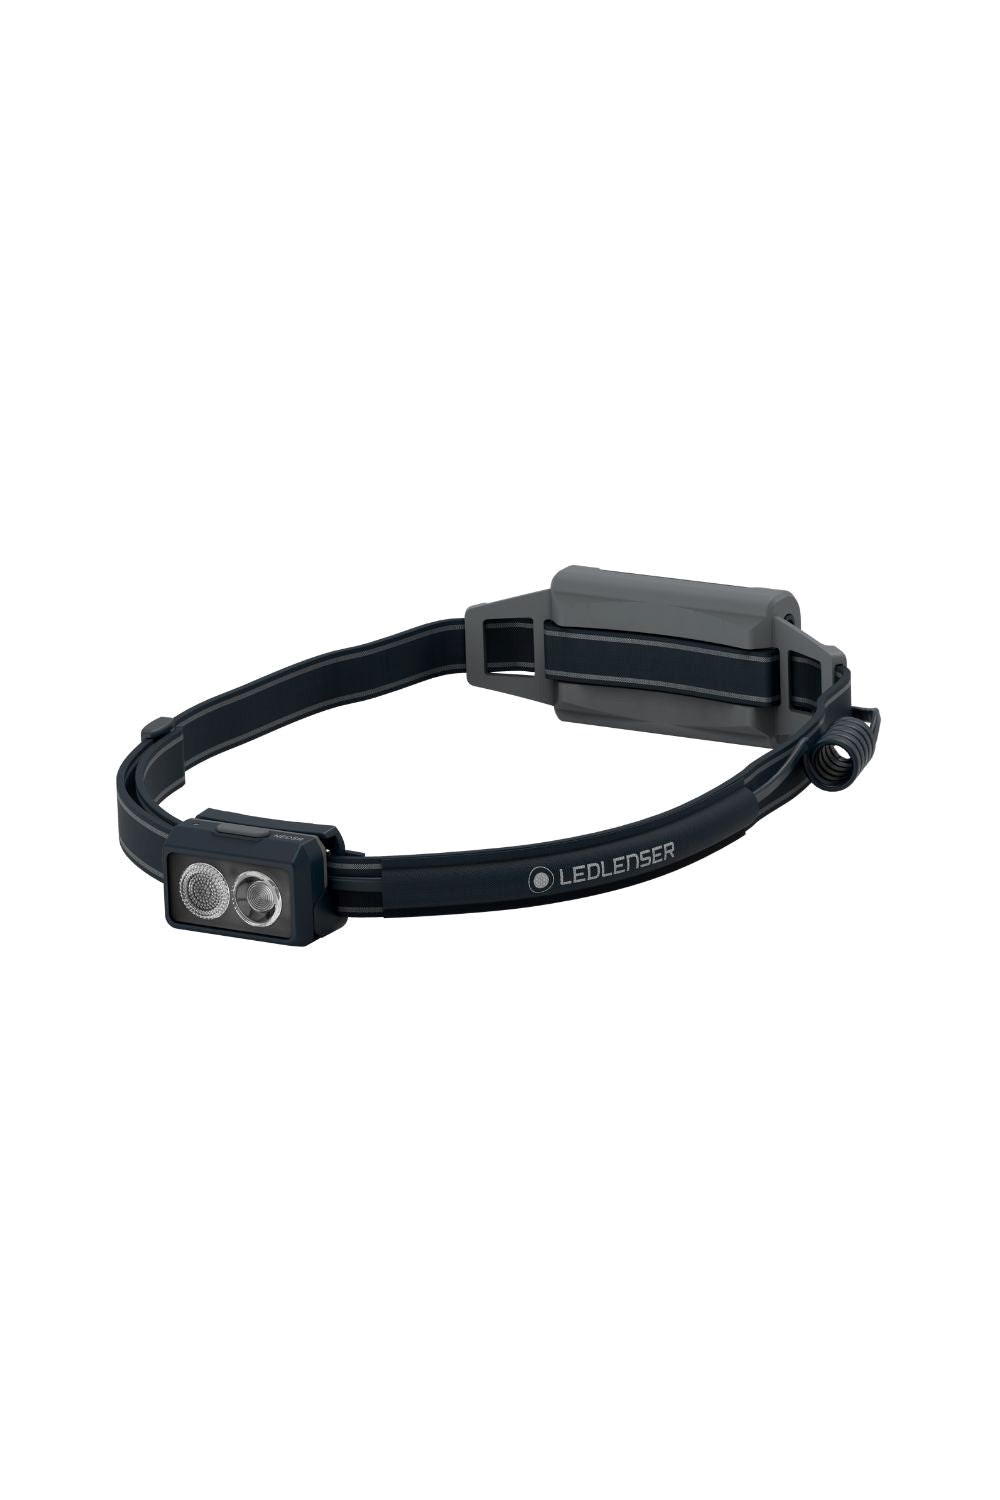 NEO5R Rechargeable Running LED Head Torch -